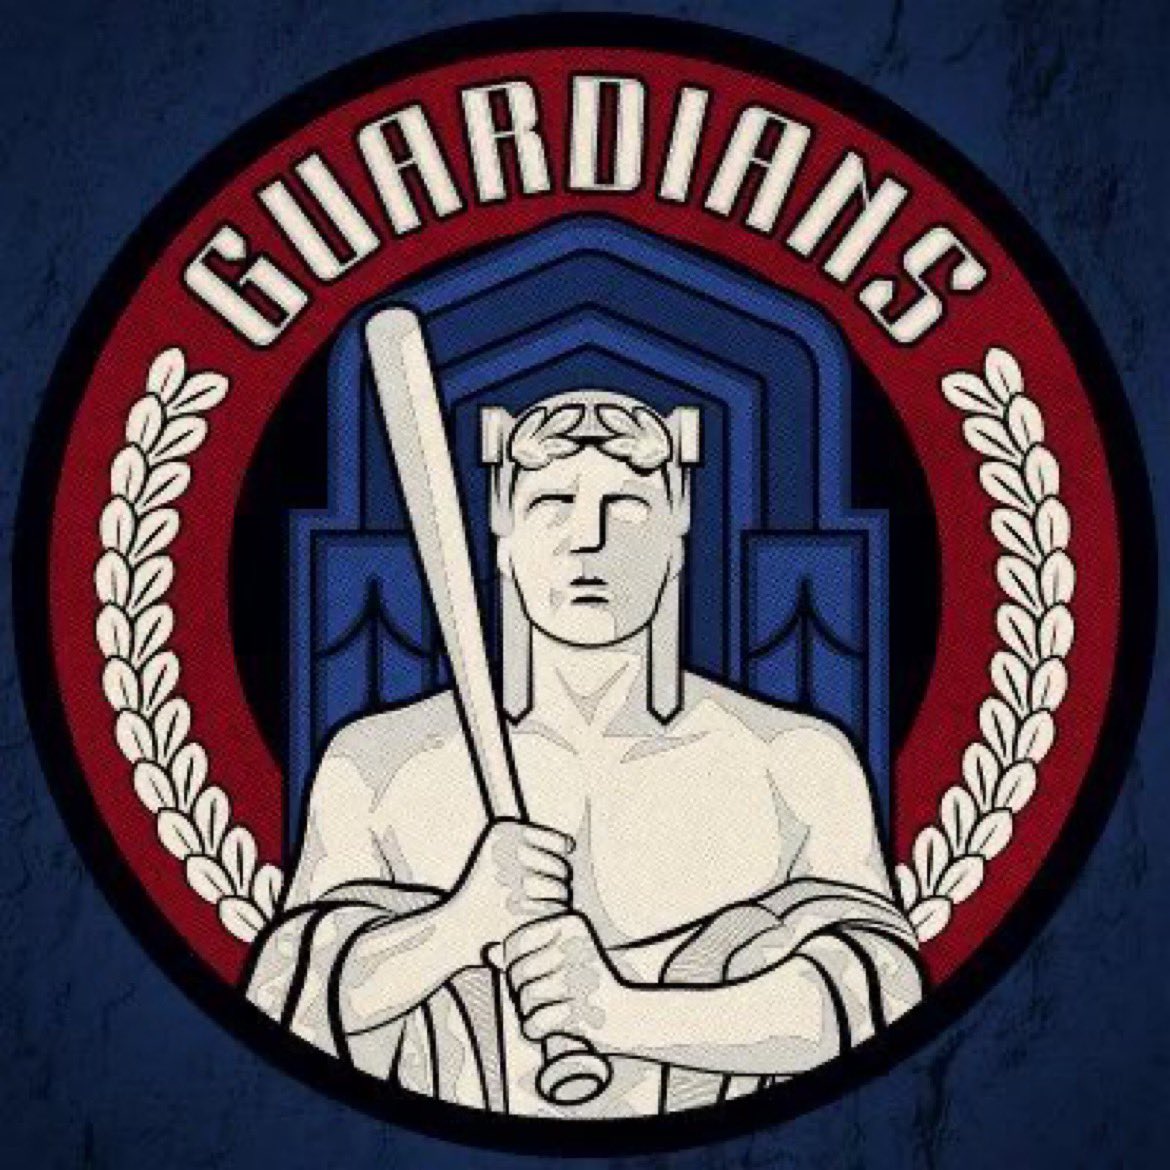 THIS should be the #Guardians’ primary logo! Maybe incorporate baseball stitching on the inside instead of the leaves? Either way, they have to use a guardian holding a bat like the old swinging Chief Wahoo logo from the 70s at some point. #ForTheland @fox8news